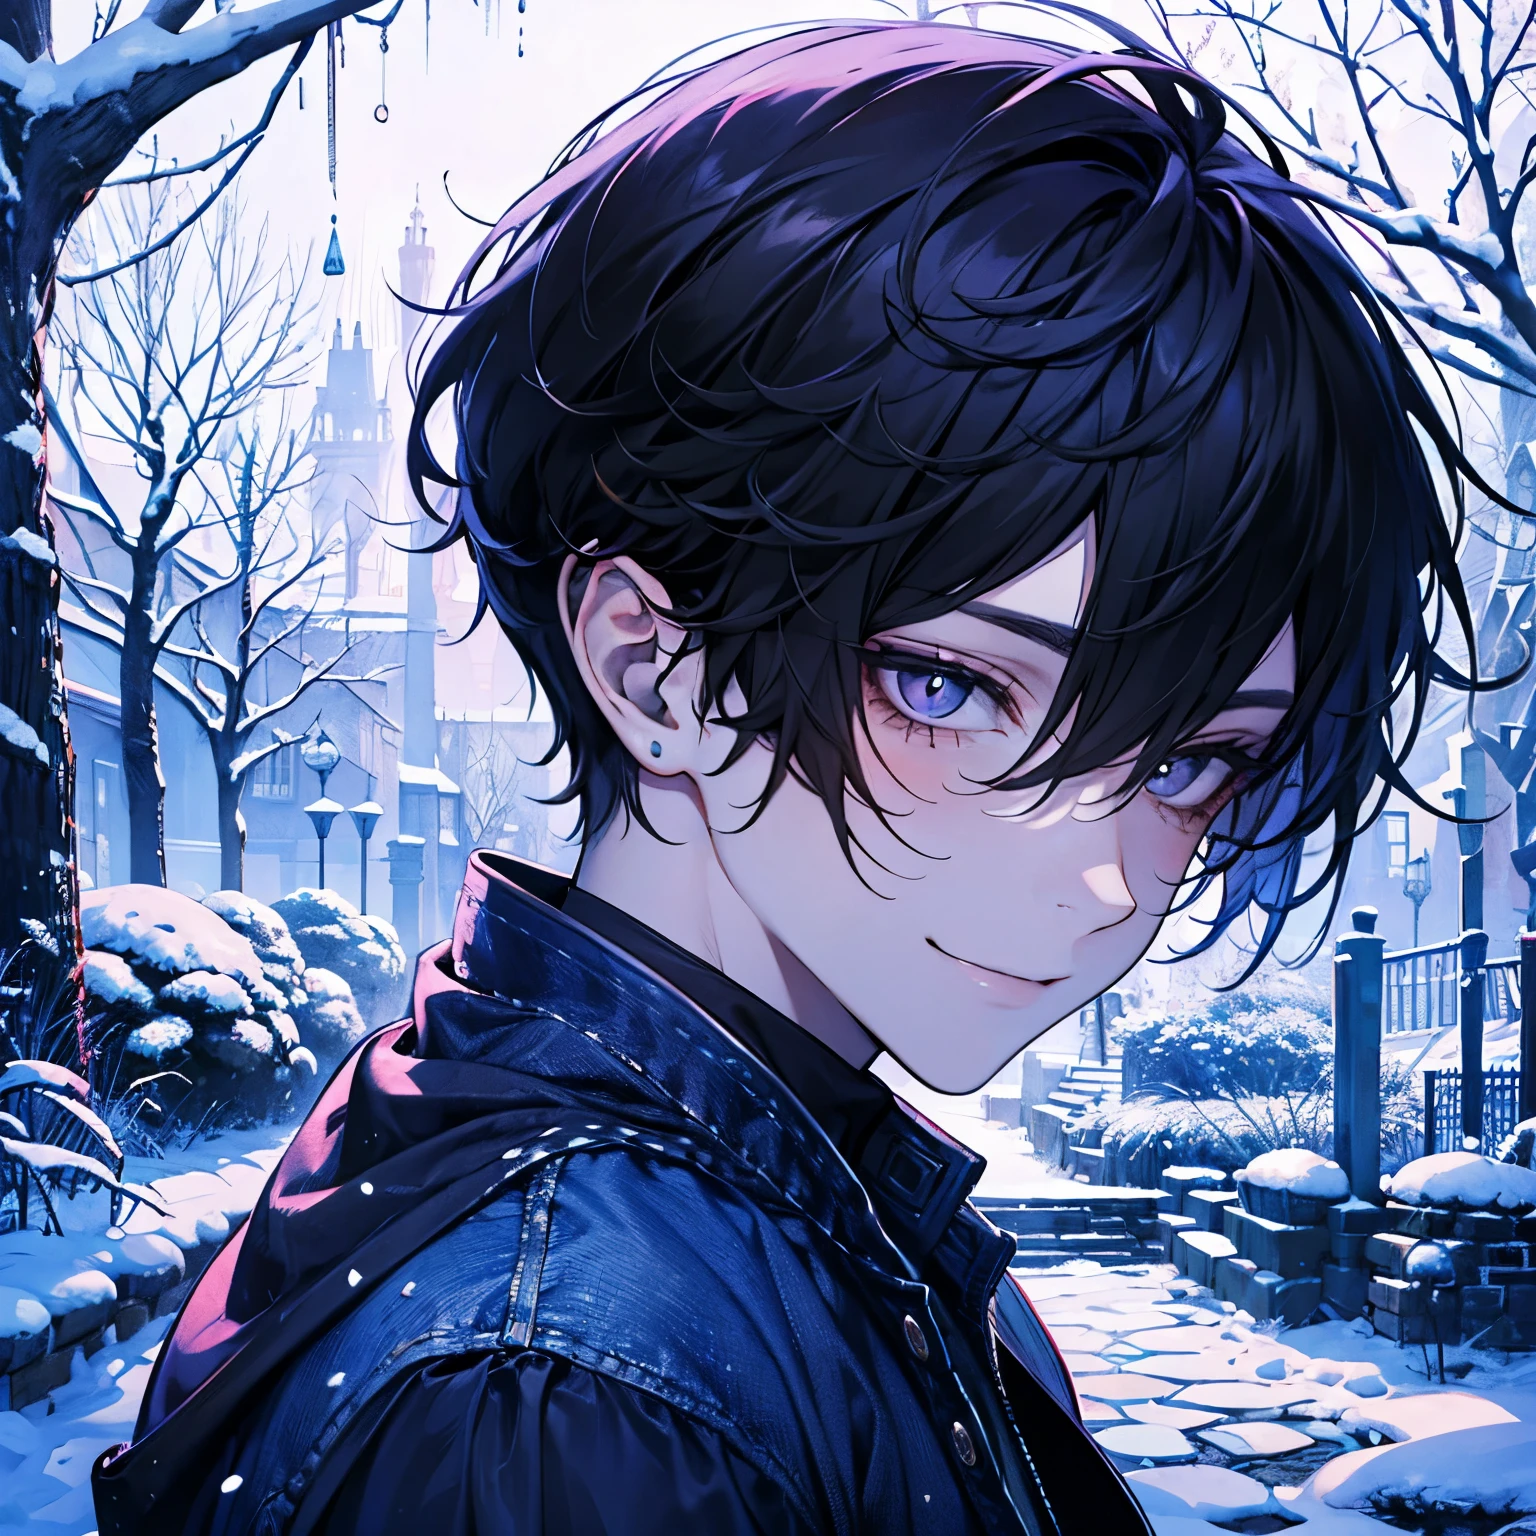 A handsome young man. The moment just before he picks up a kisses it. A quiet garden covered with snow. The garden has a small pine tree and a stone lantern covered with snow, softly illuminated by the early morning light. His features are smooth black hair, styled in a denim and T-shirt style, and deep purple eyes that reflect the hopeful beginning,blush,Smile